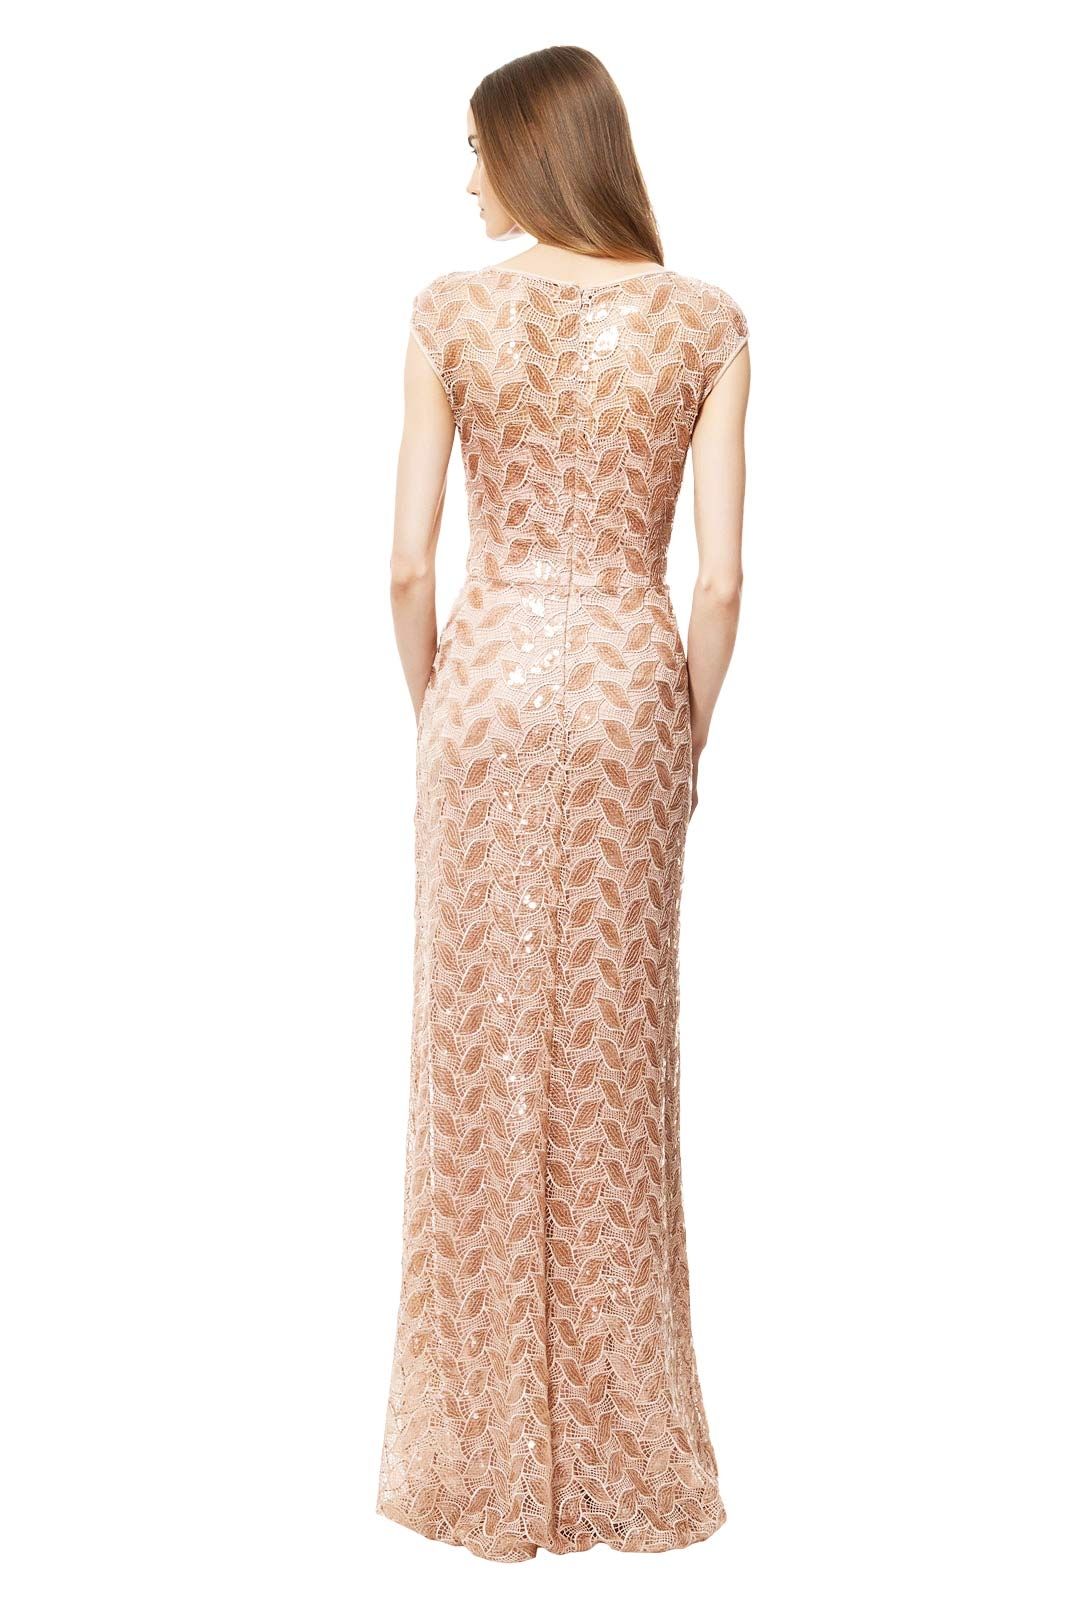 David Meister - Blush Sequin Gown - Pink - Back